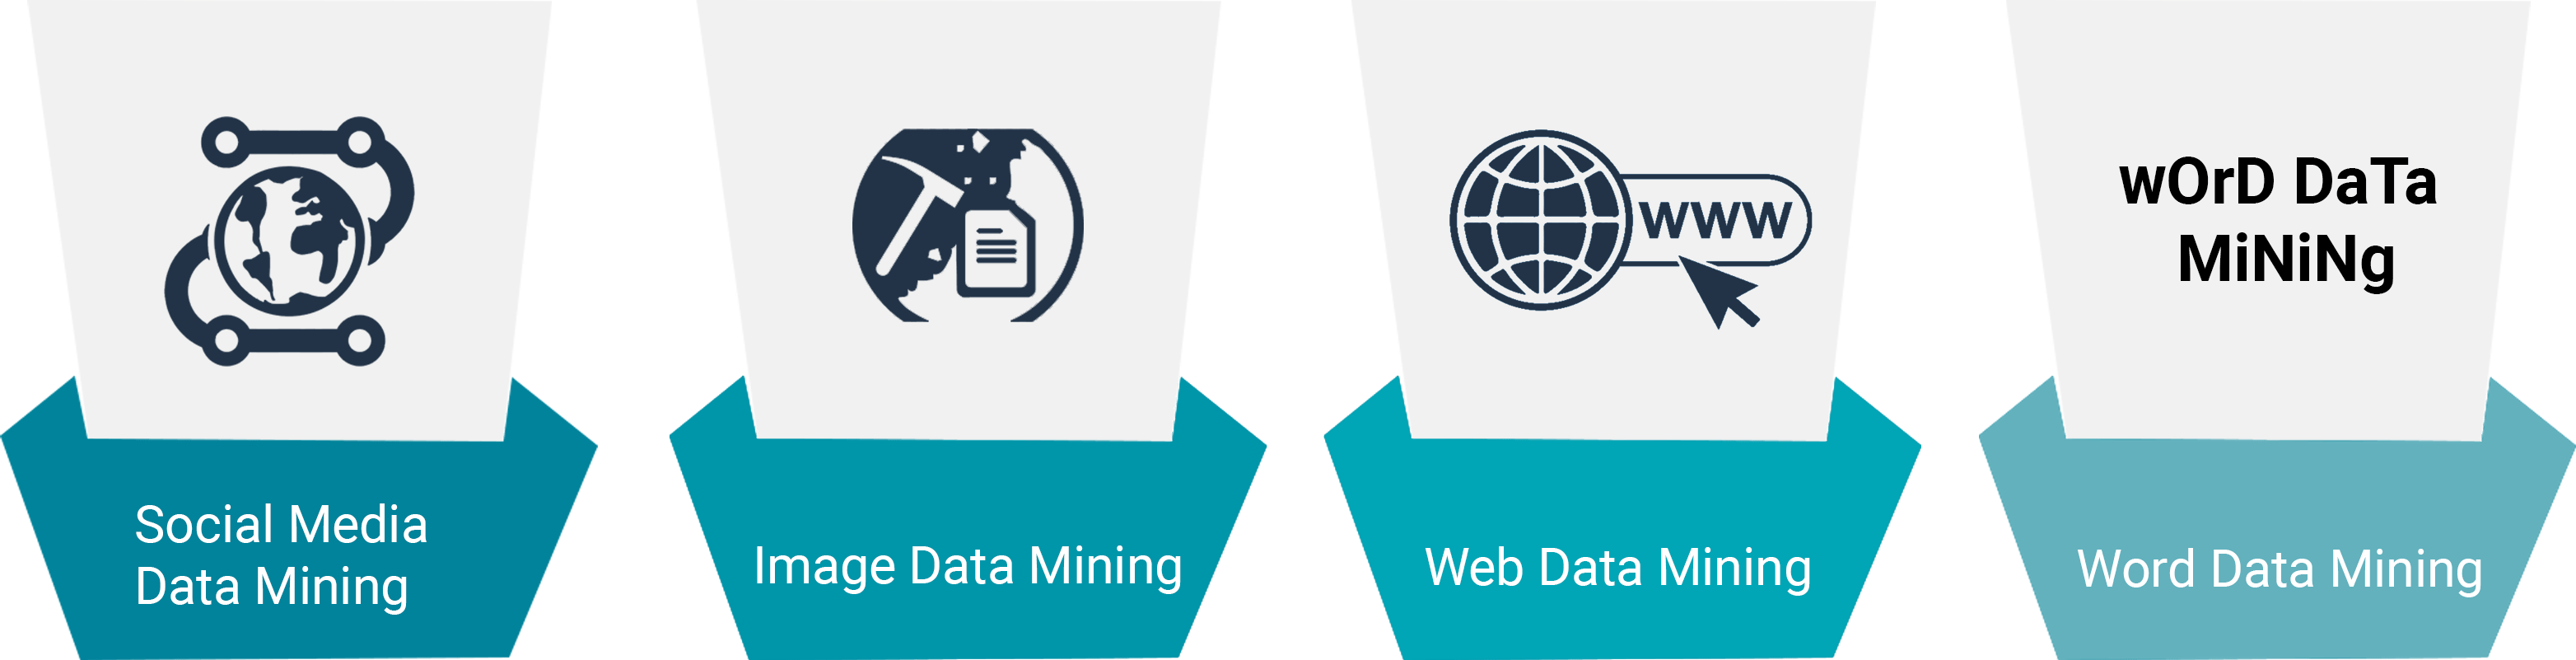 Data Mining Services Offered By InfoCleanse